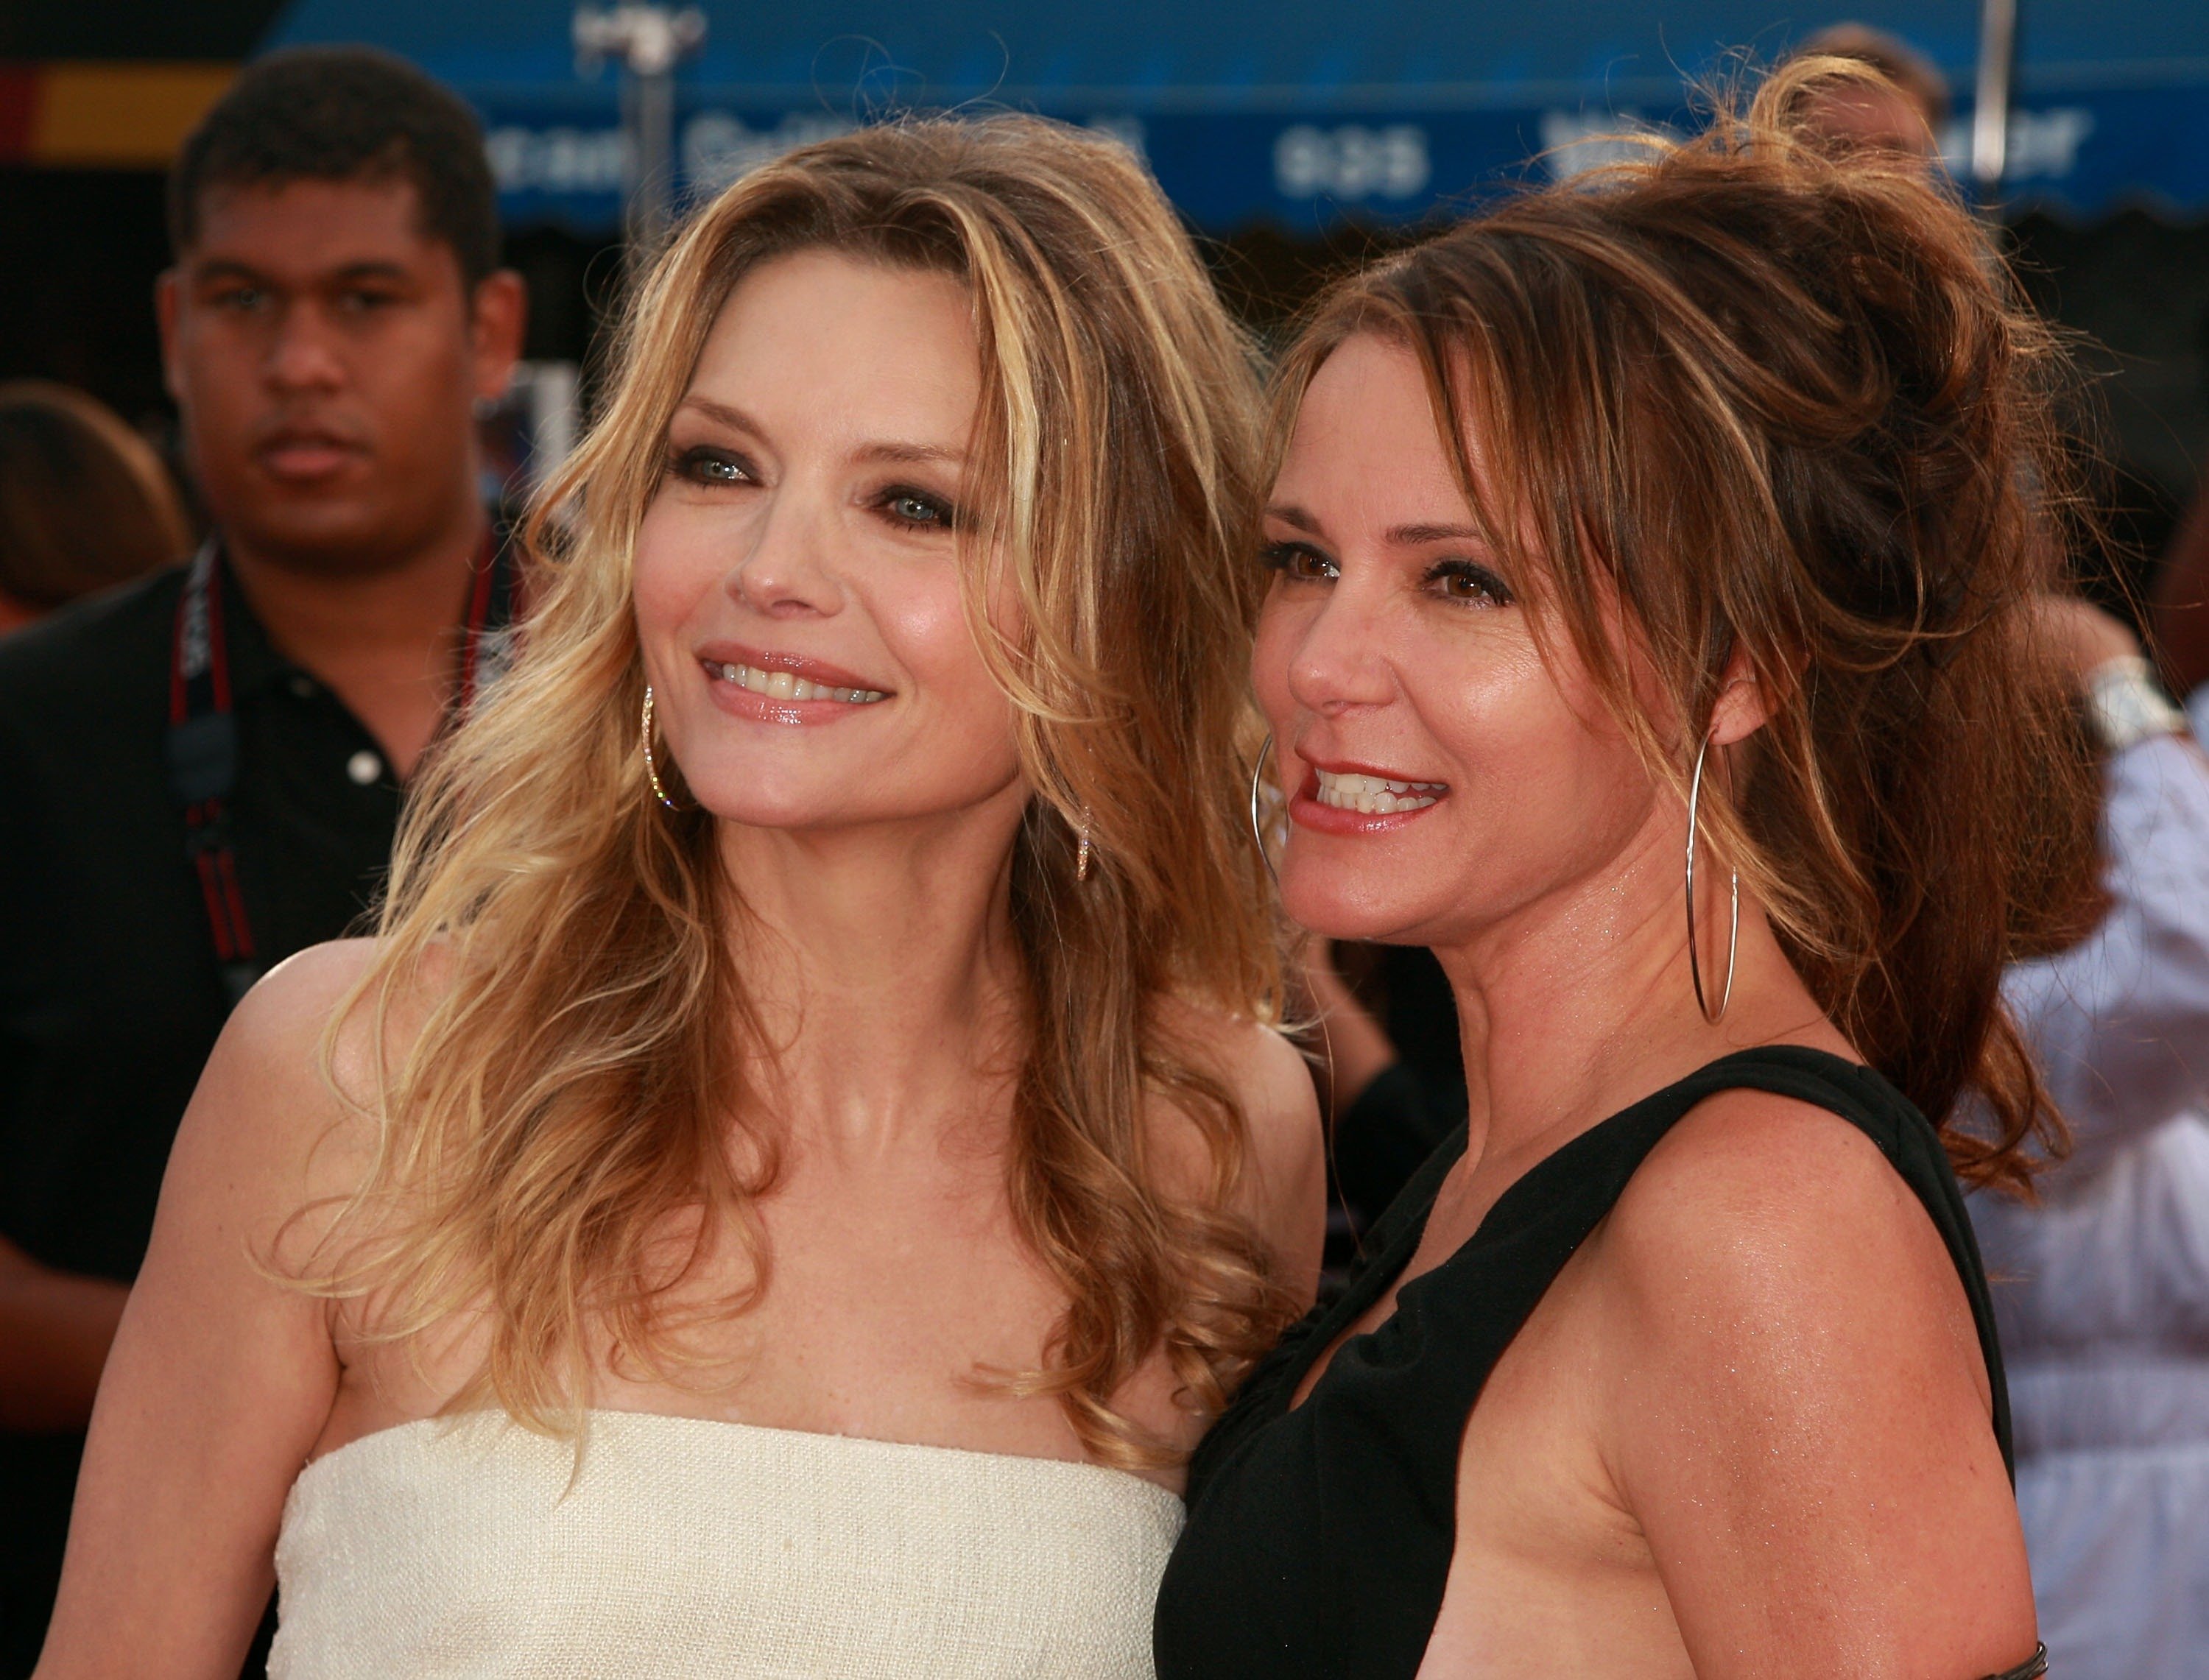 Michelle and Dedee Pfeiffer at the premiere of "Hairspray" hosted at Mann Village Theatre, Westwood, CA, on July 10, 2007. | Source: Getty Images